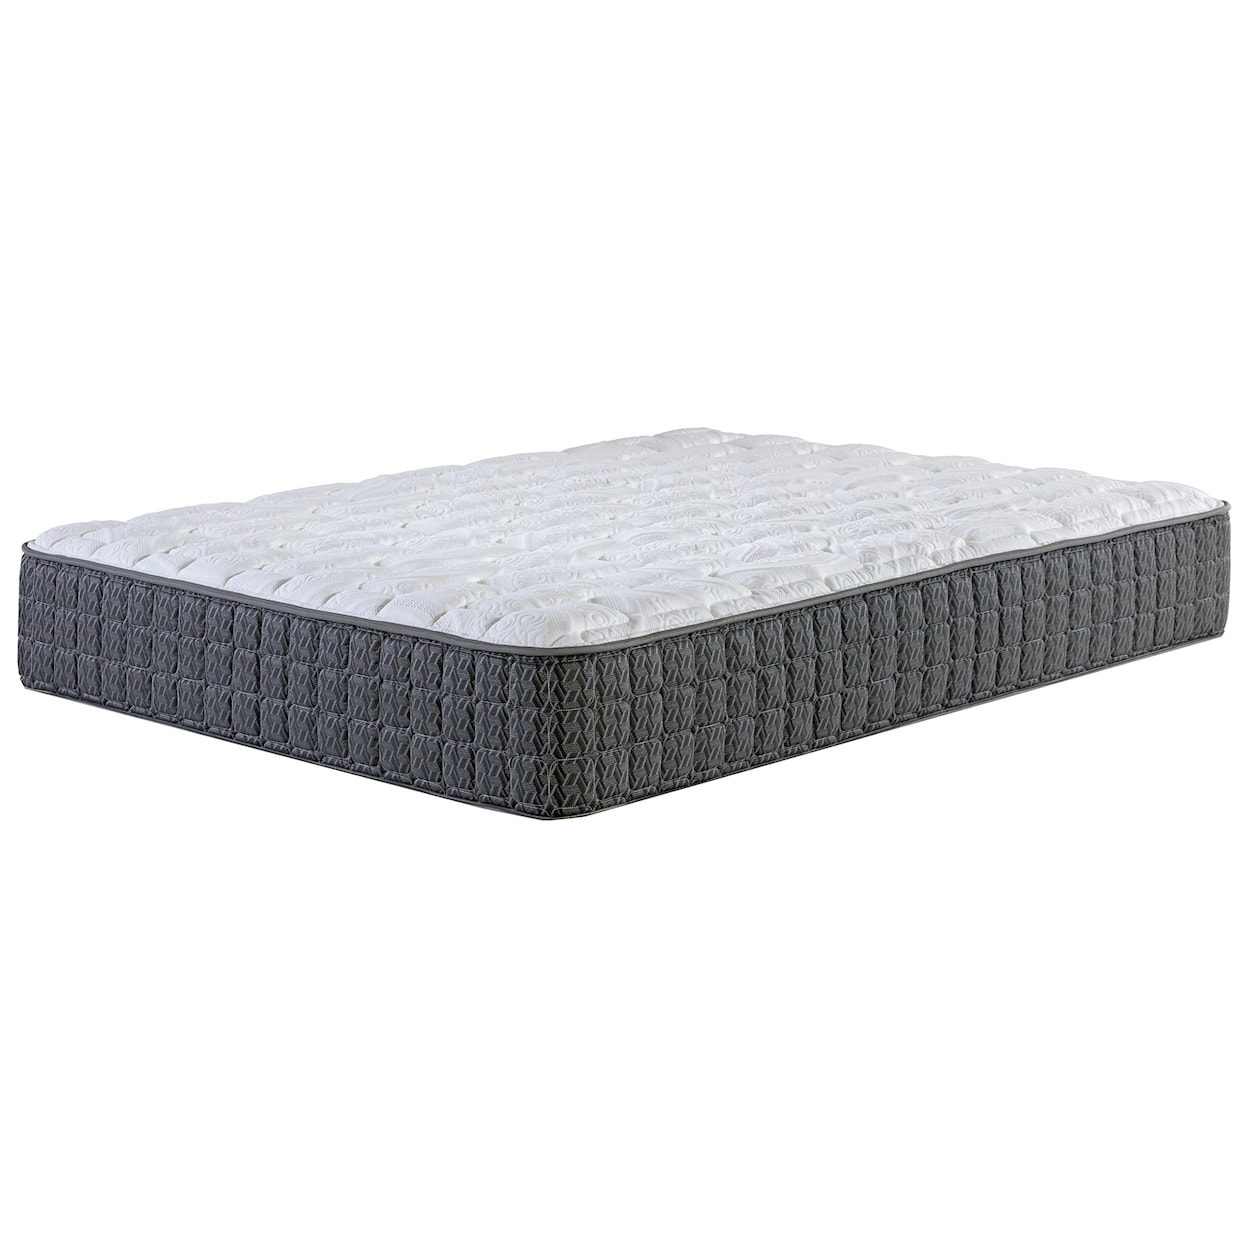 Corsicana Hallandale Firm Cal King Firm Two Sided Mattress